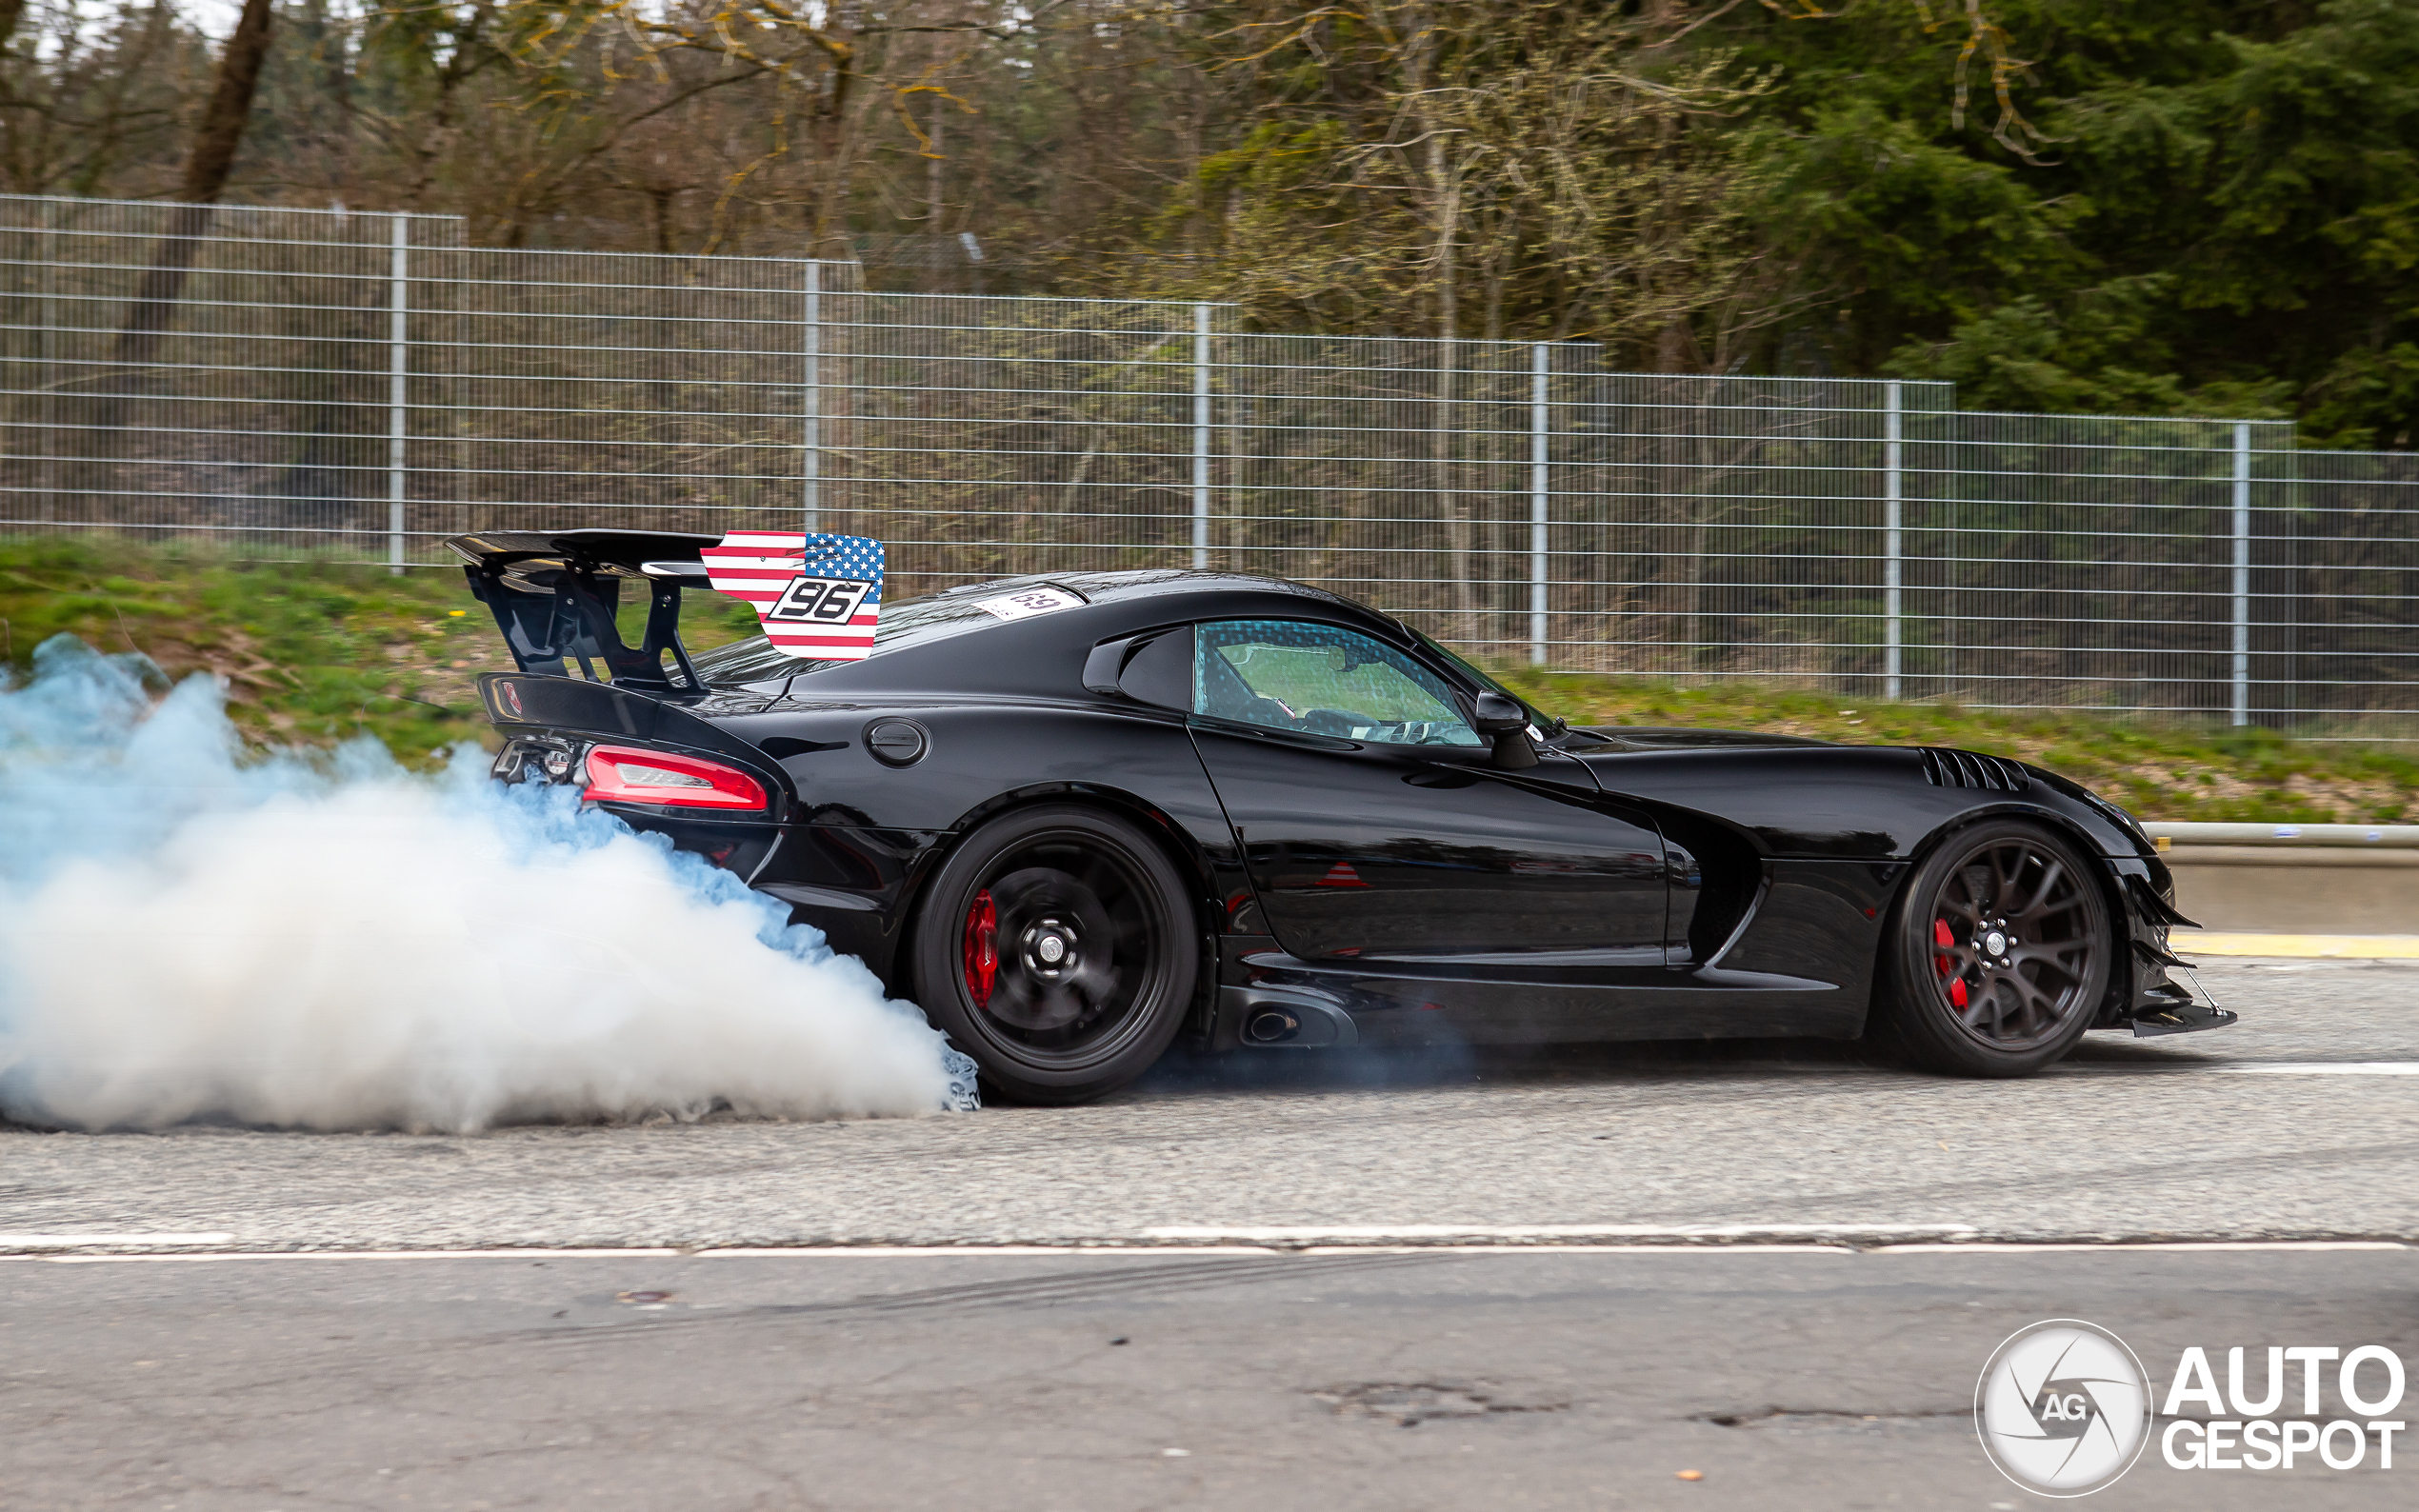 Viper ACR Extreme gedraagt zich extreem